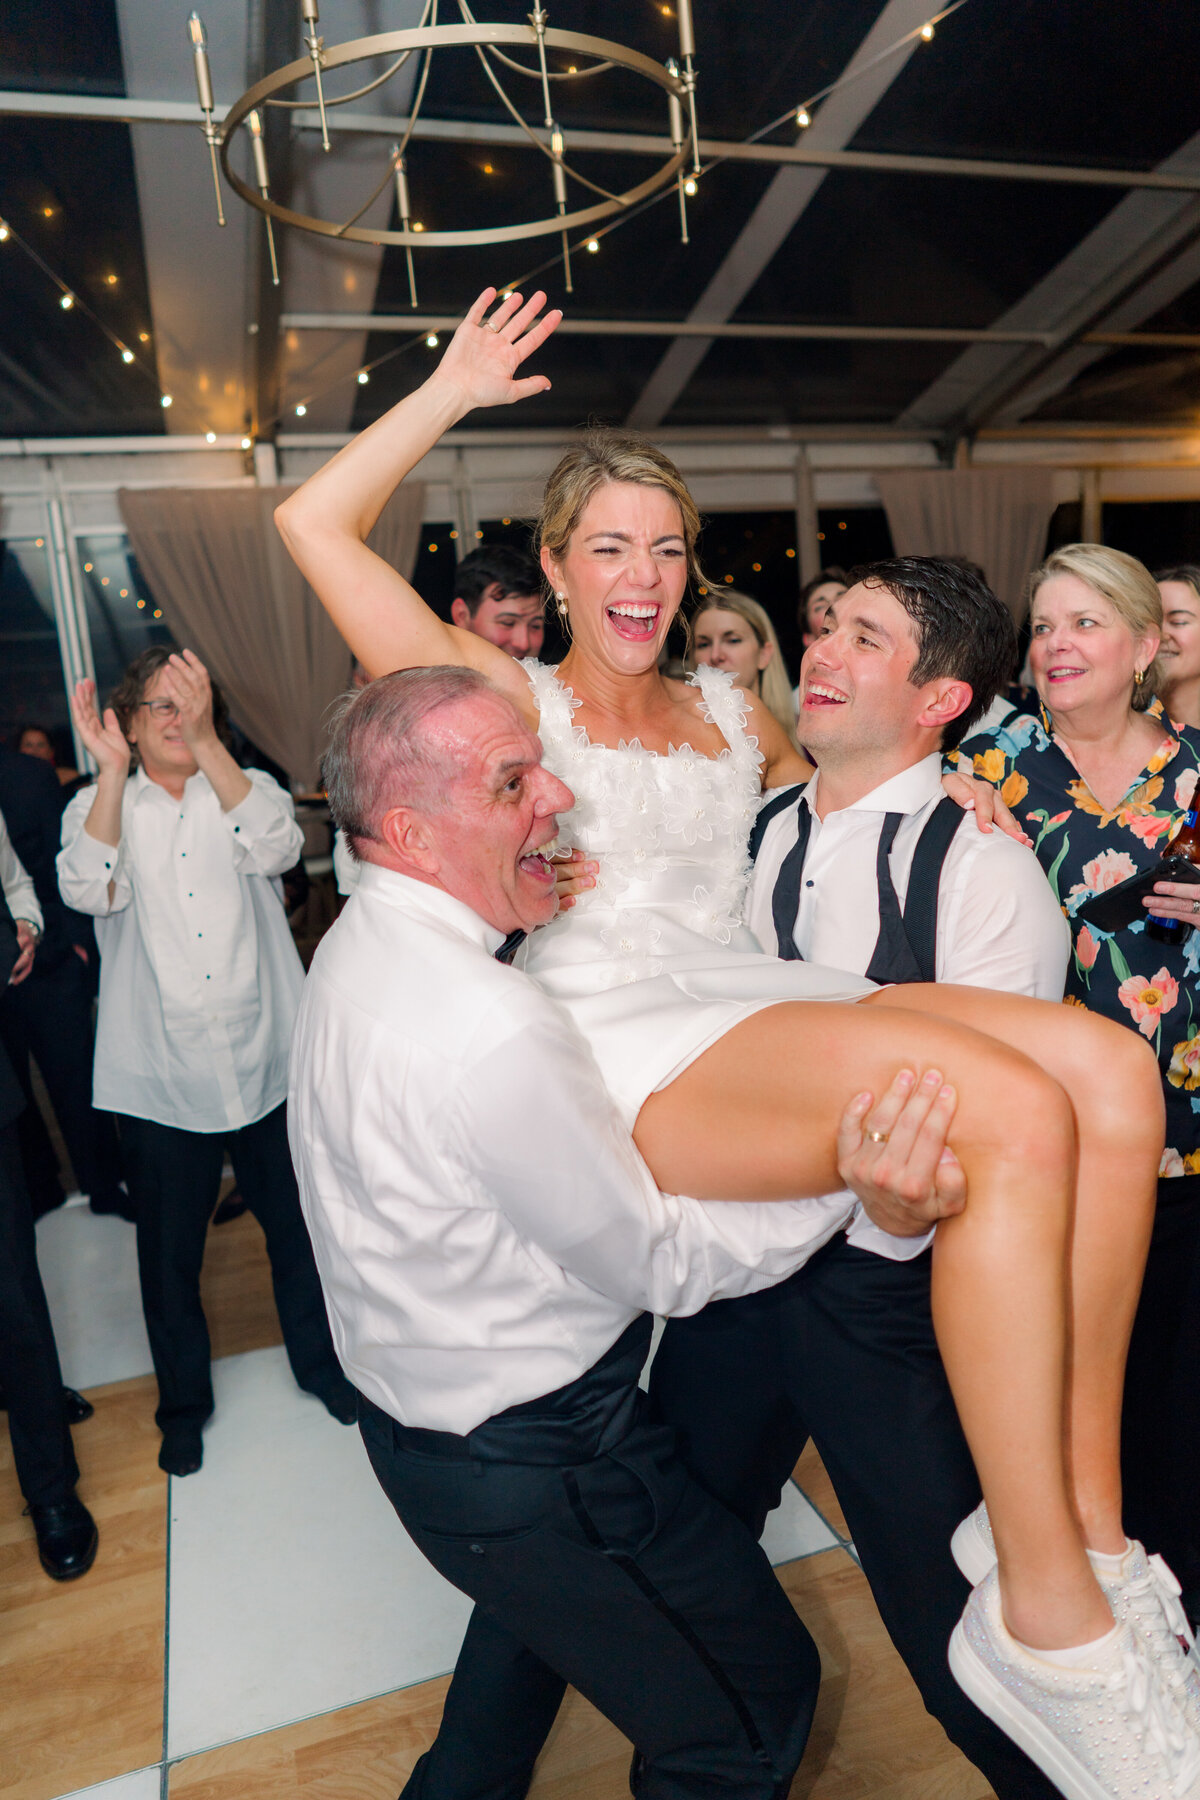 Father of the bride and groom lift up bride on the dance floor at Lowndes Grove wedding. Candid wedding reception flash photos. Charleston based destination wedding photographer.